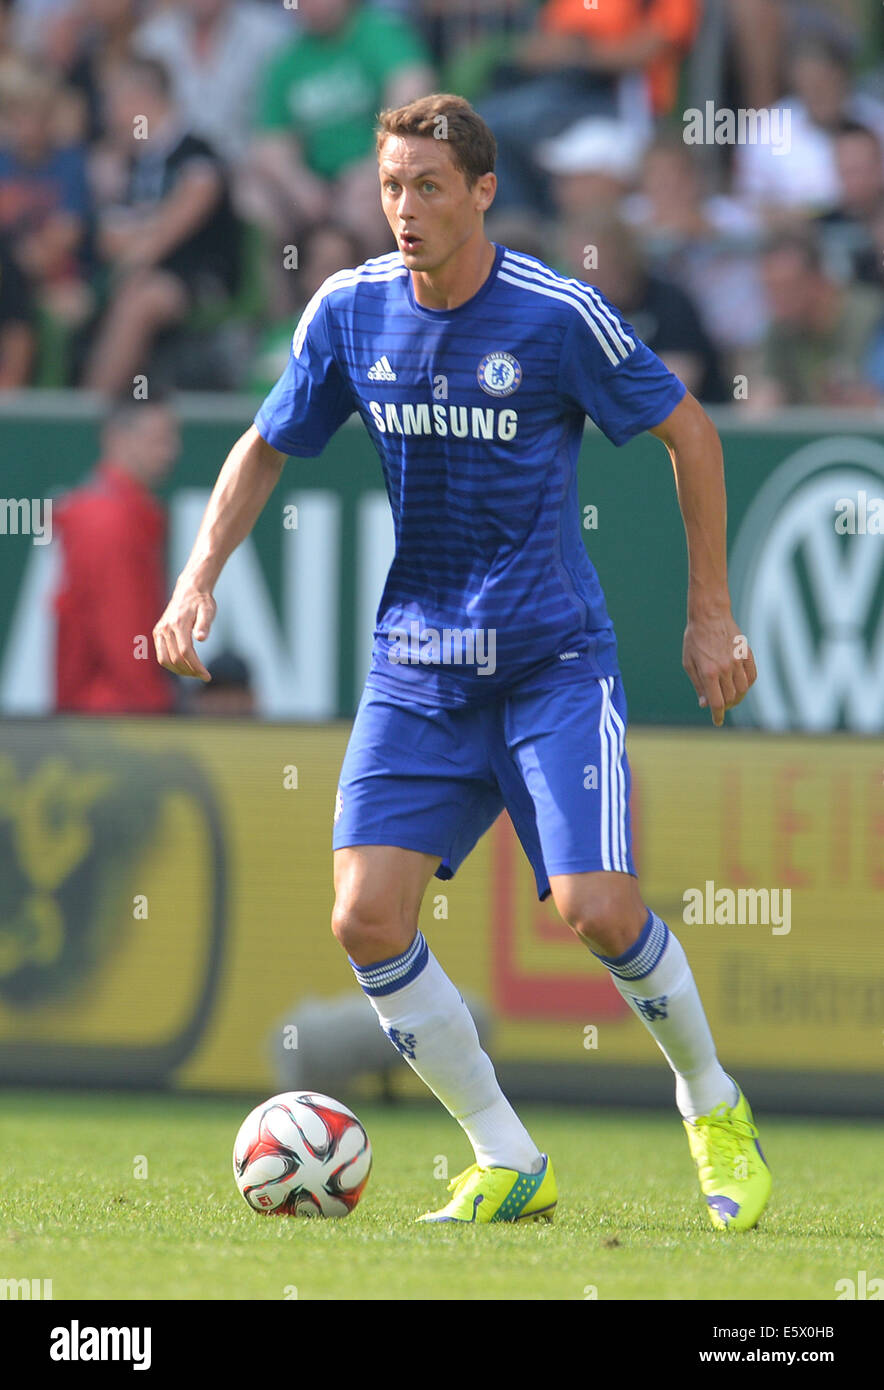 Bremen, Germany. 03rd Aug, 2014. Chelsea's Nemanja Matic in action during the friendly soccer match between Werder Bremen and FC Chelsea at Weser Stadium in Bremen, Germany, 03 August 2014. Photo: CARMEN JASPERSEN/DPA/Alamy Live News Stock Photo